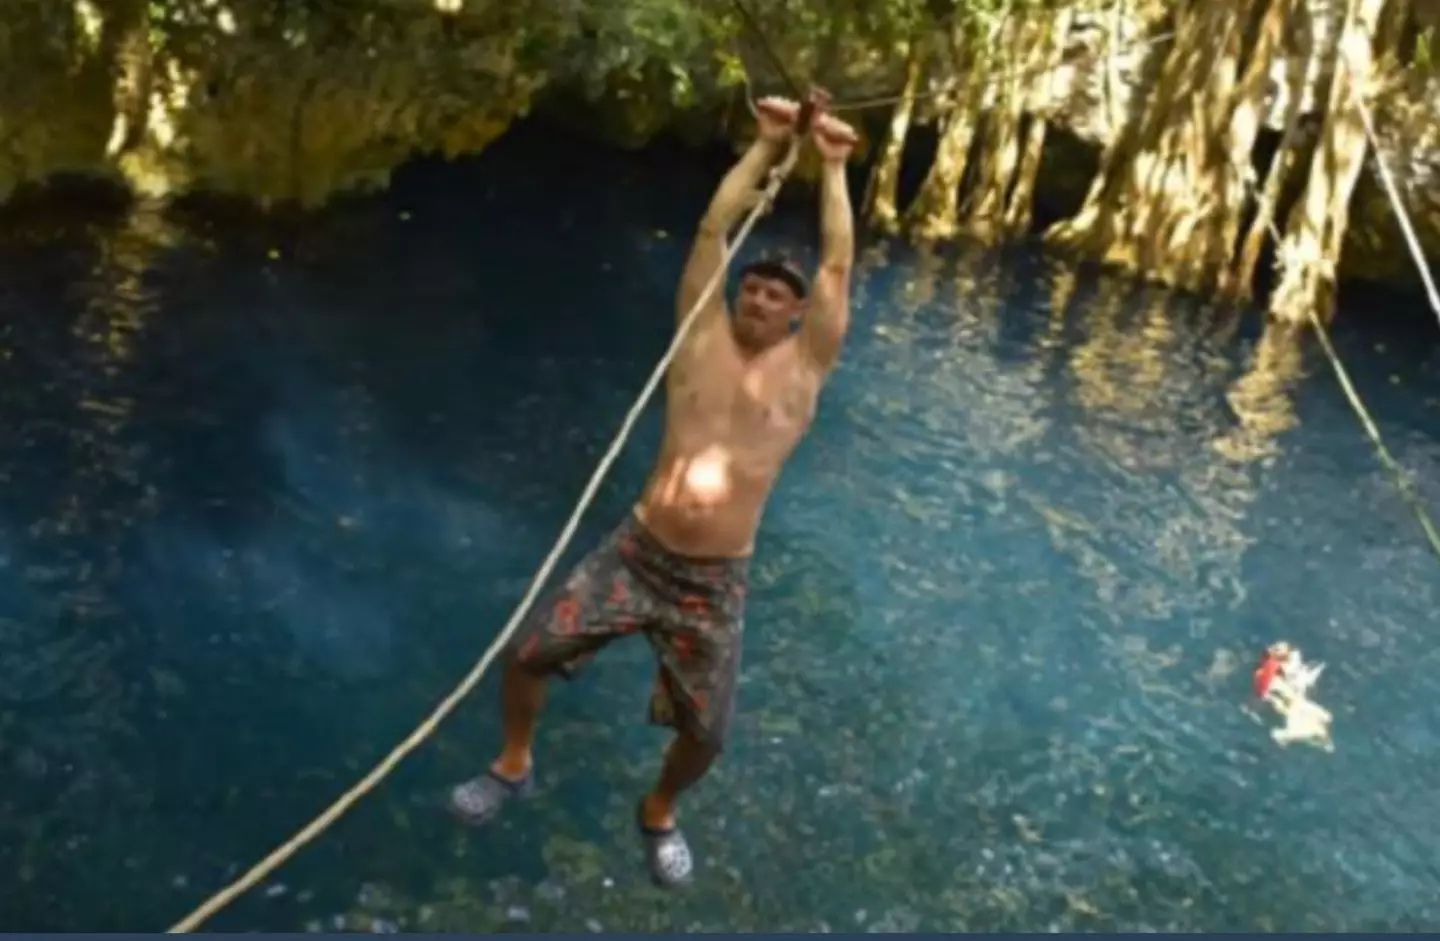 Ferenc Kirinovits was pictured zipwiring in Mexico just months before his surgery.